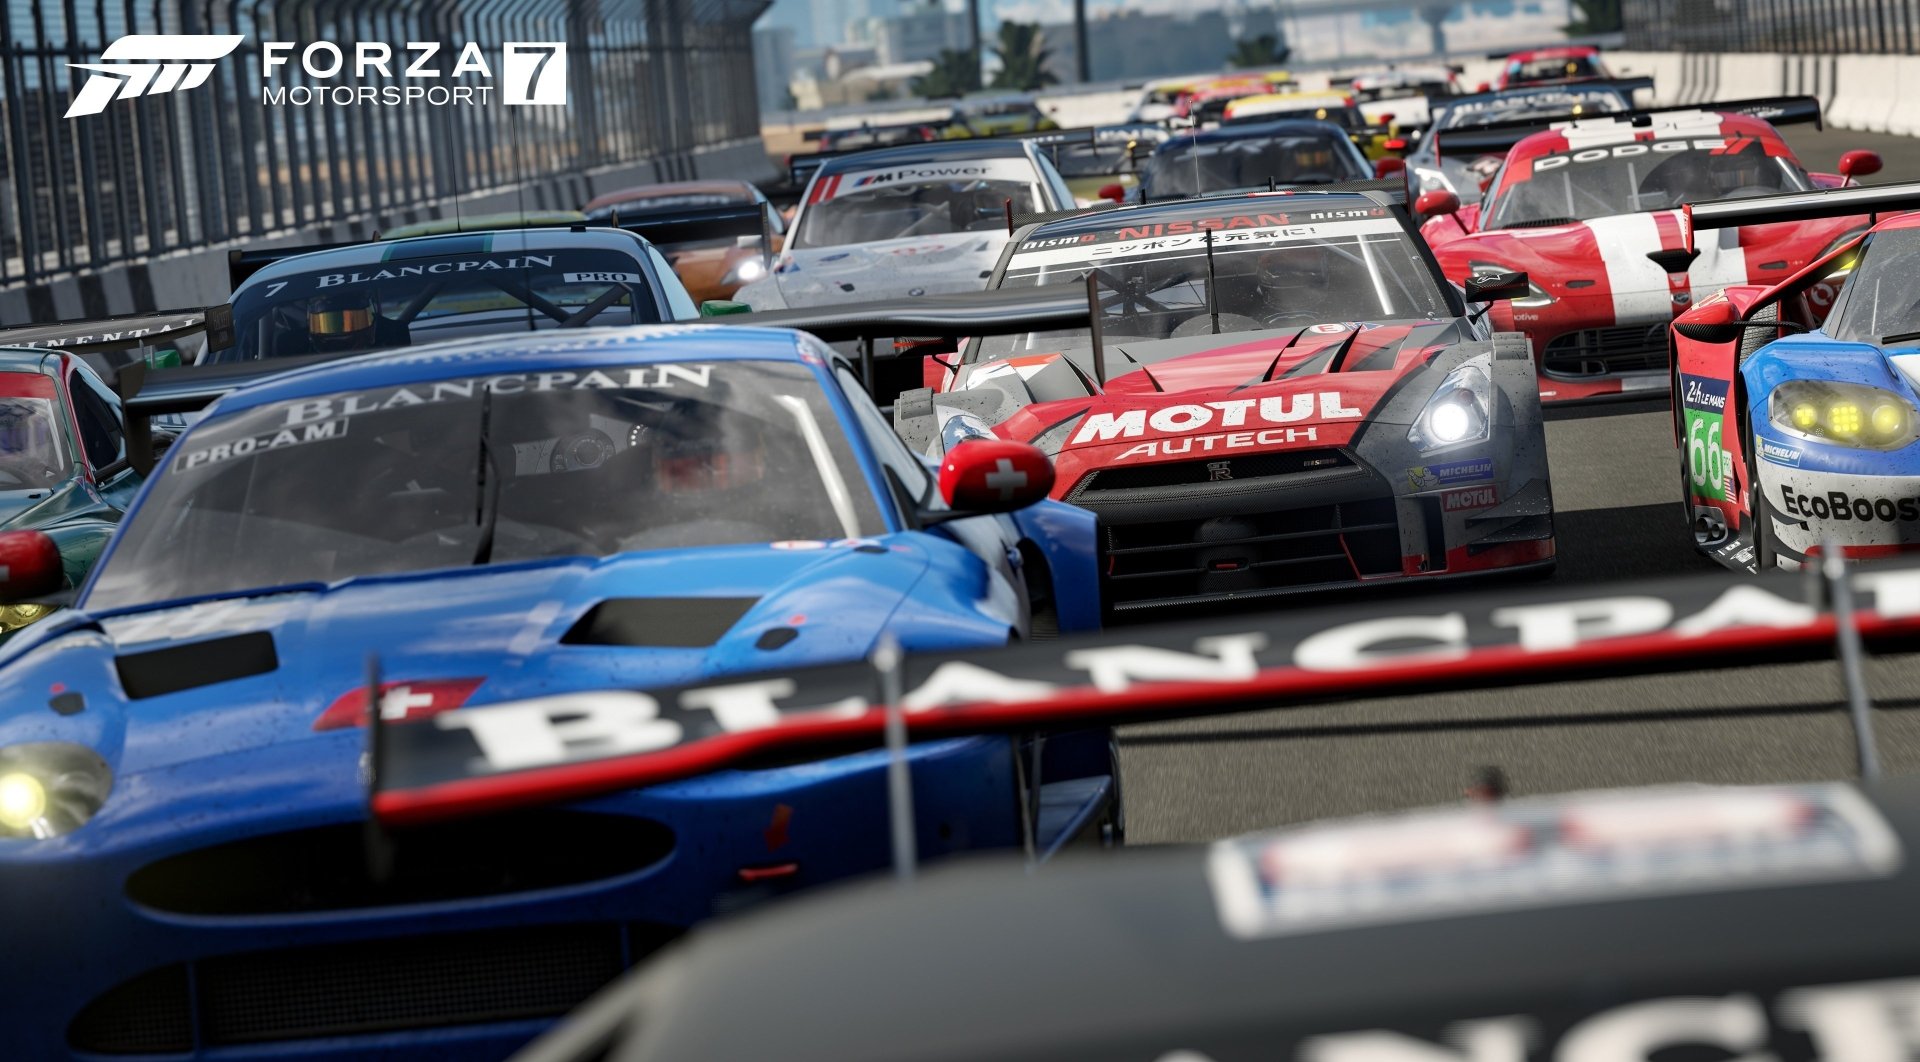 hd forza motorsport 7 images